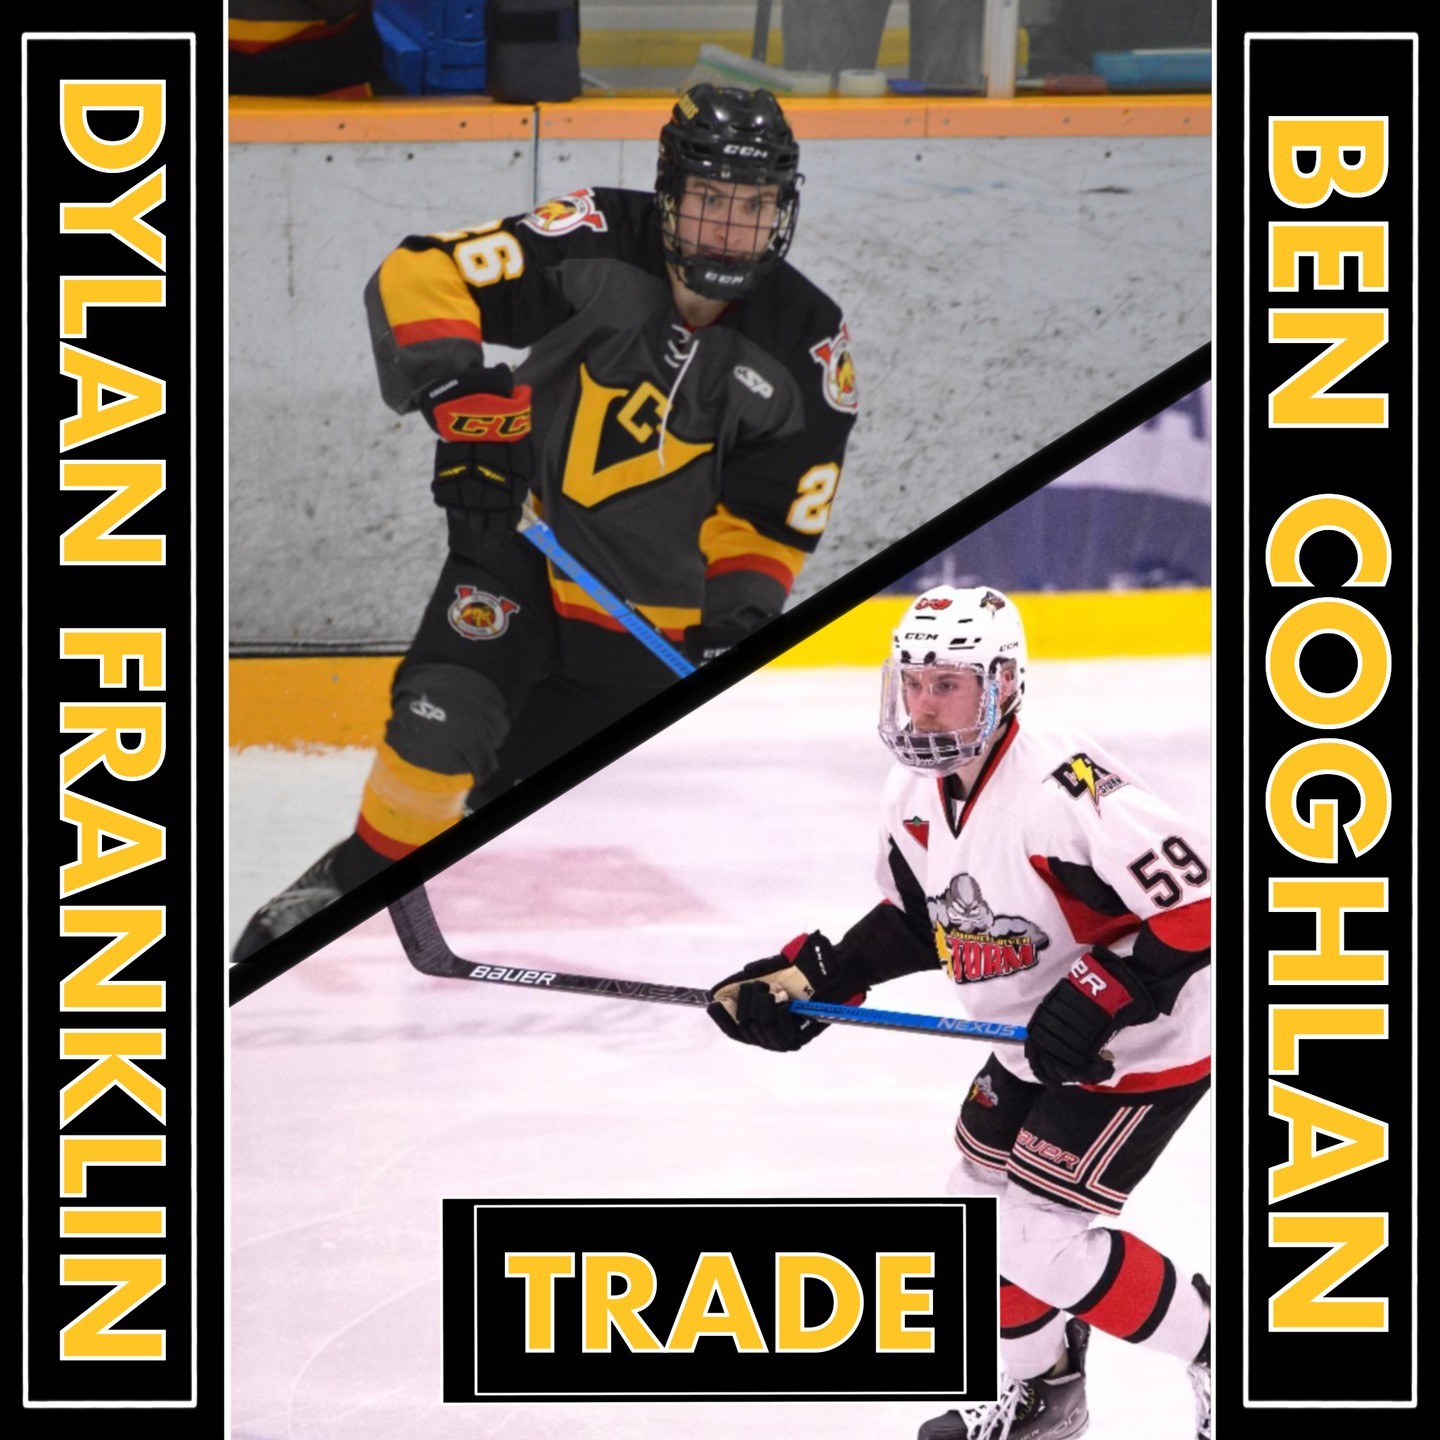 💥TRADE ANNOUNCEMENT💥

The Cougars have traded Dylan Franklin to the Storm in exchange for 2003 born defenceman Ben Coghlan. Coghlan has collected 48 PTS in 90 games between the Buccaneers and Storm since 2019.

Cougars would like to thank Dylan for his time with the Cougars